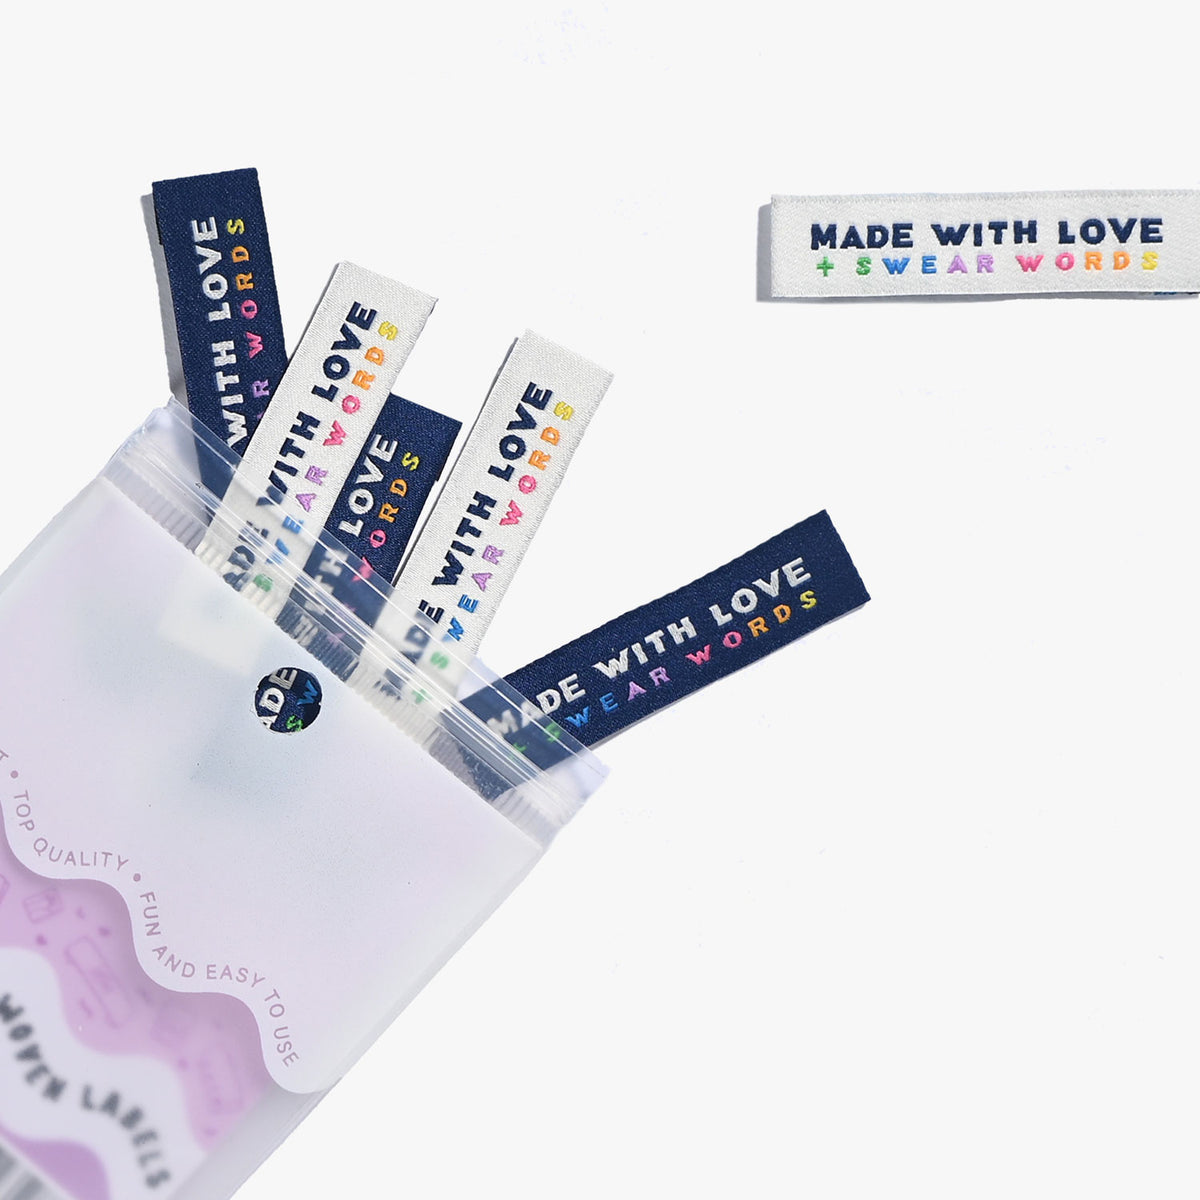 6 Woven Labels - Made with Love + Swear Words